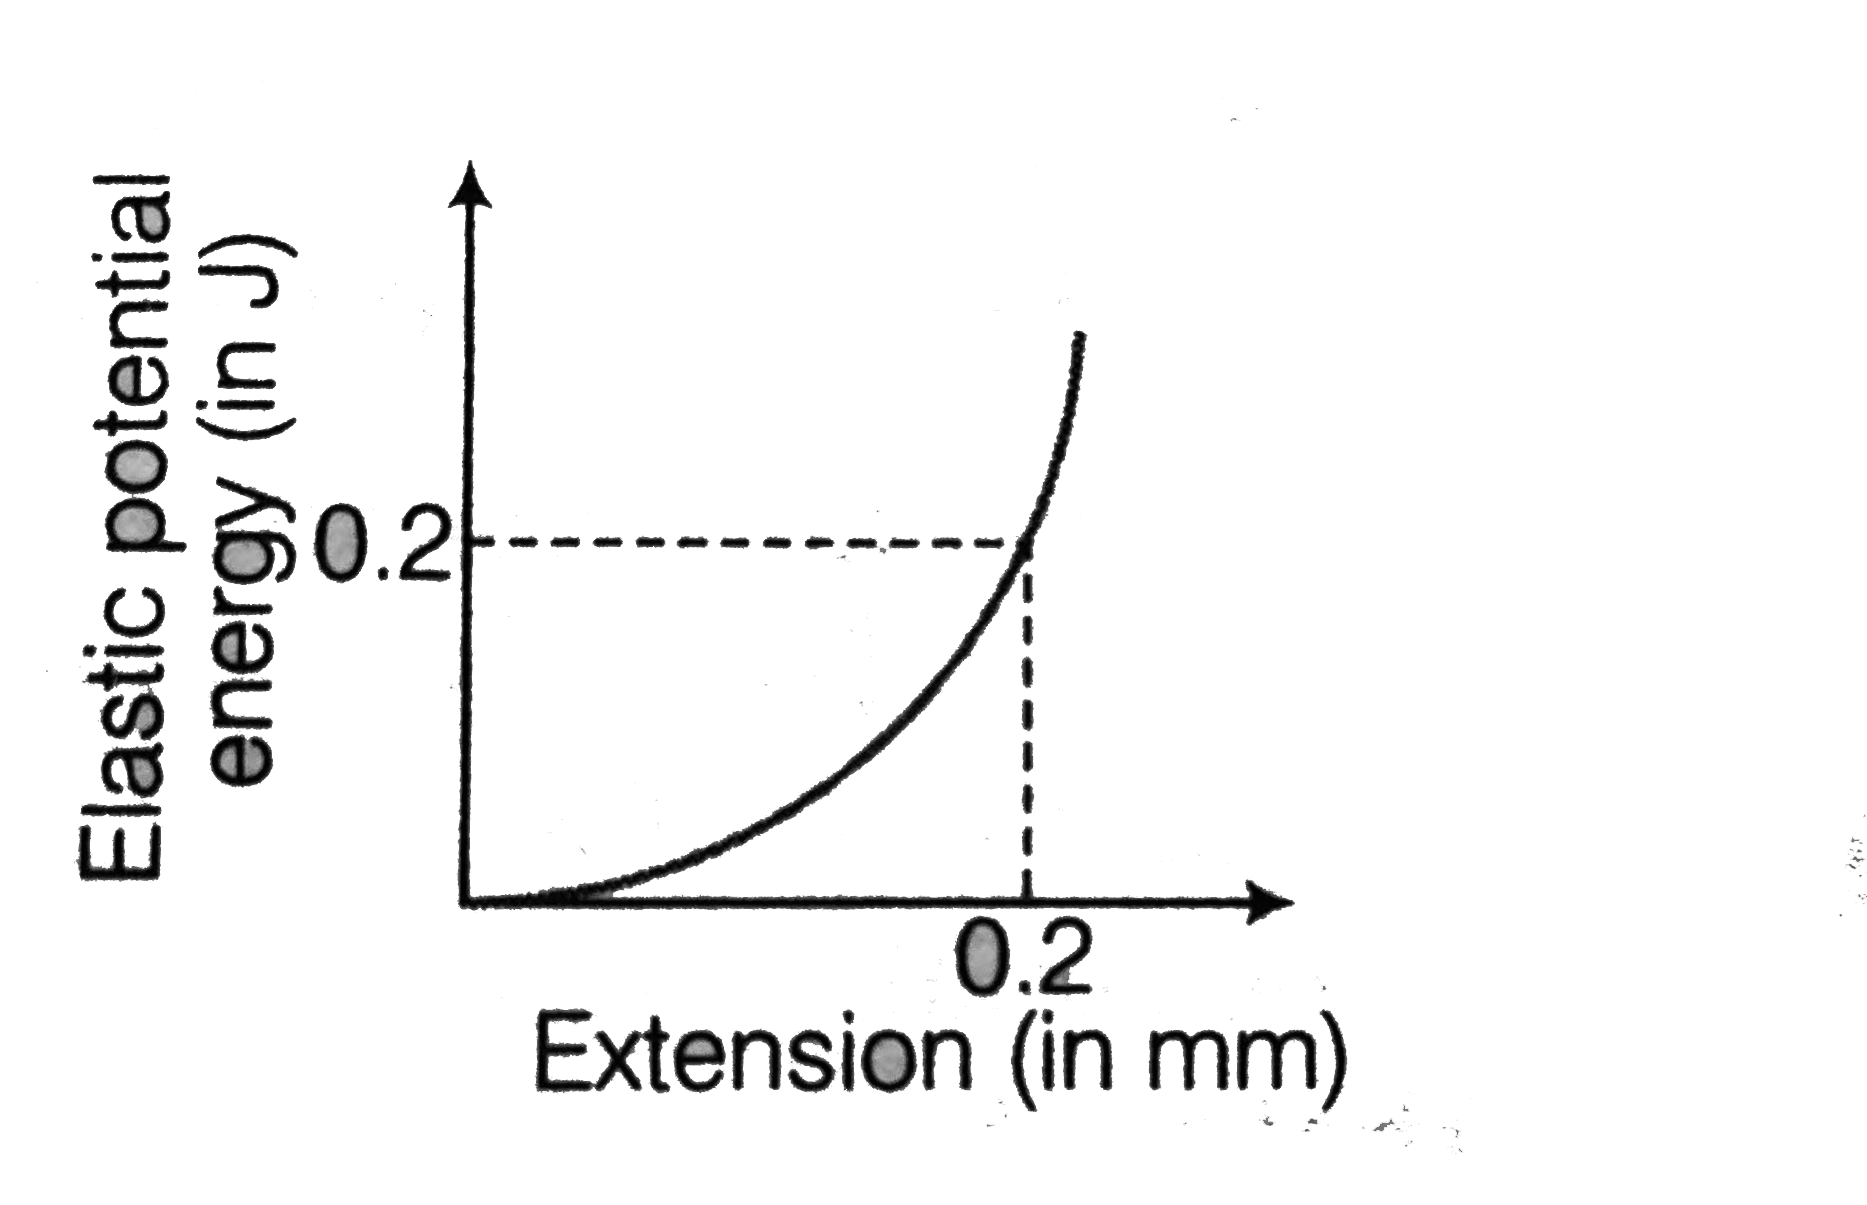 Figure shows the graph of elastic potential energy  (U)  stored versus extension, for a steel wire (Y = 2xx10^(11) Pa) of volume 200 c c. If area of cross- section  A and original length L, then